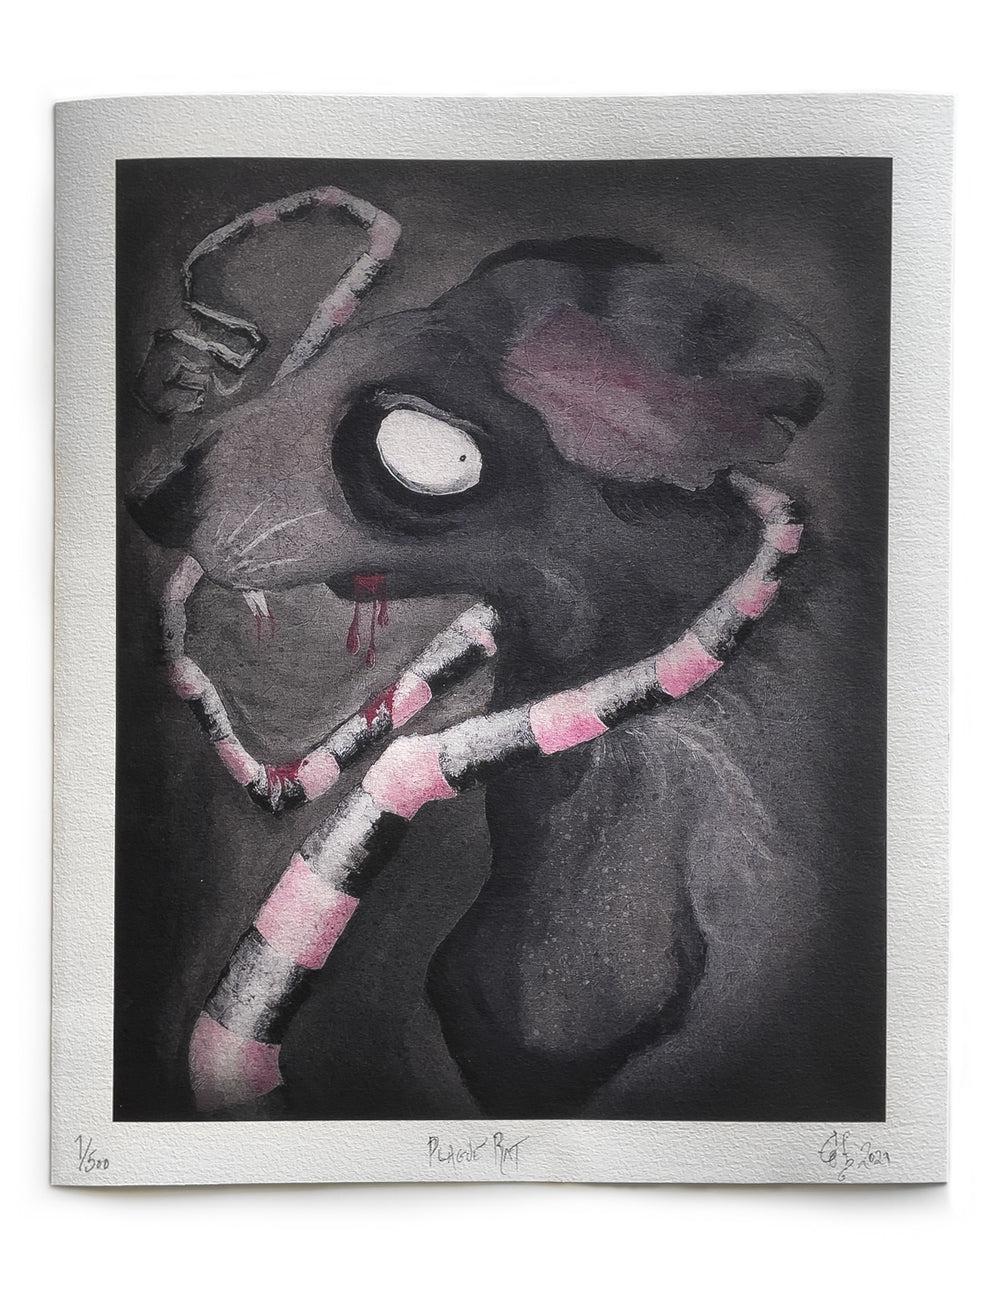 Plague Rat - Fine Art Giclee Print, Limited Edition of 500